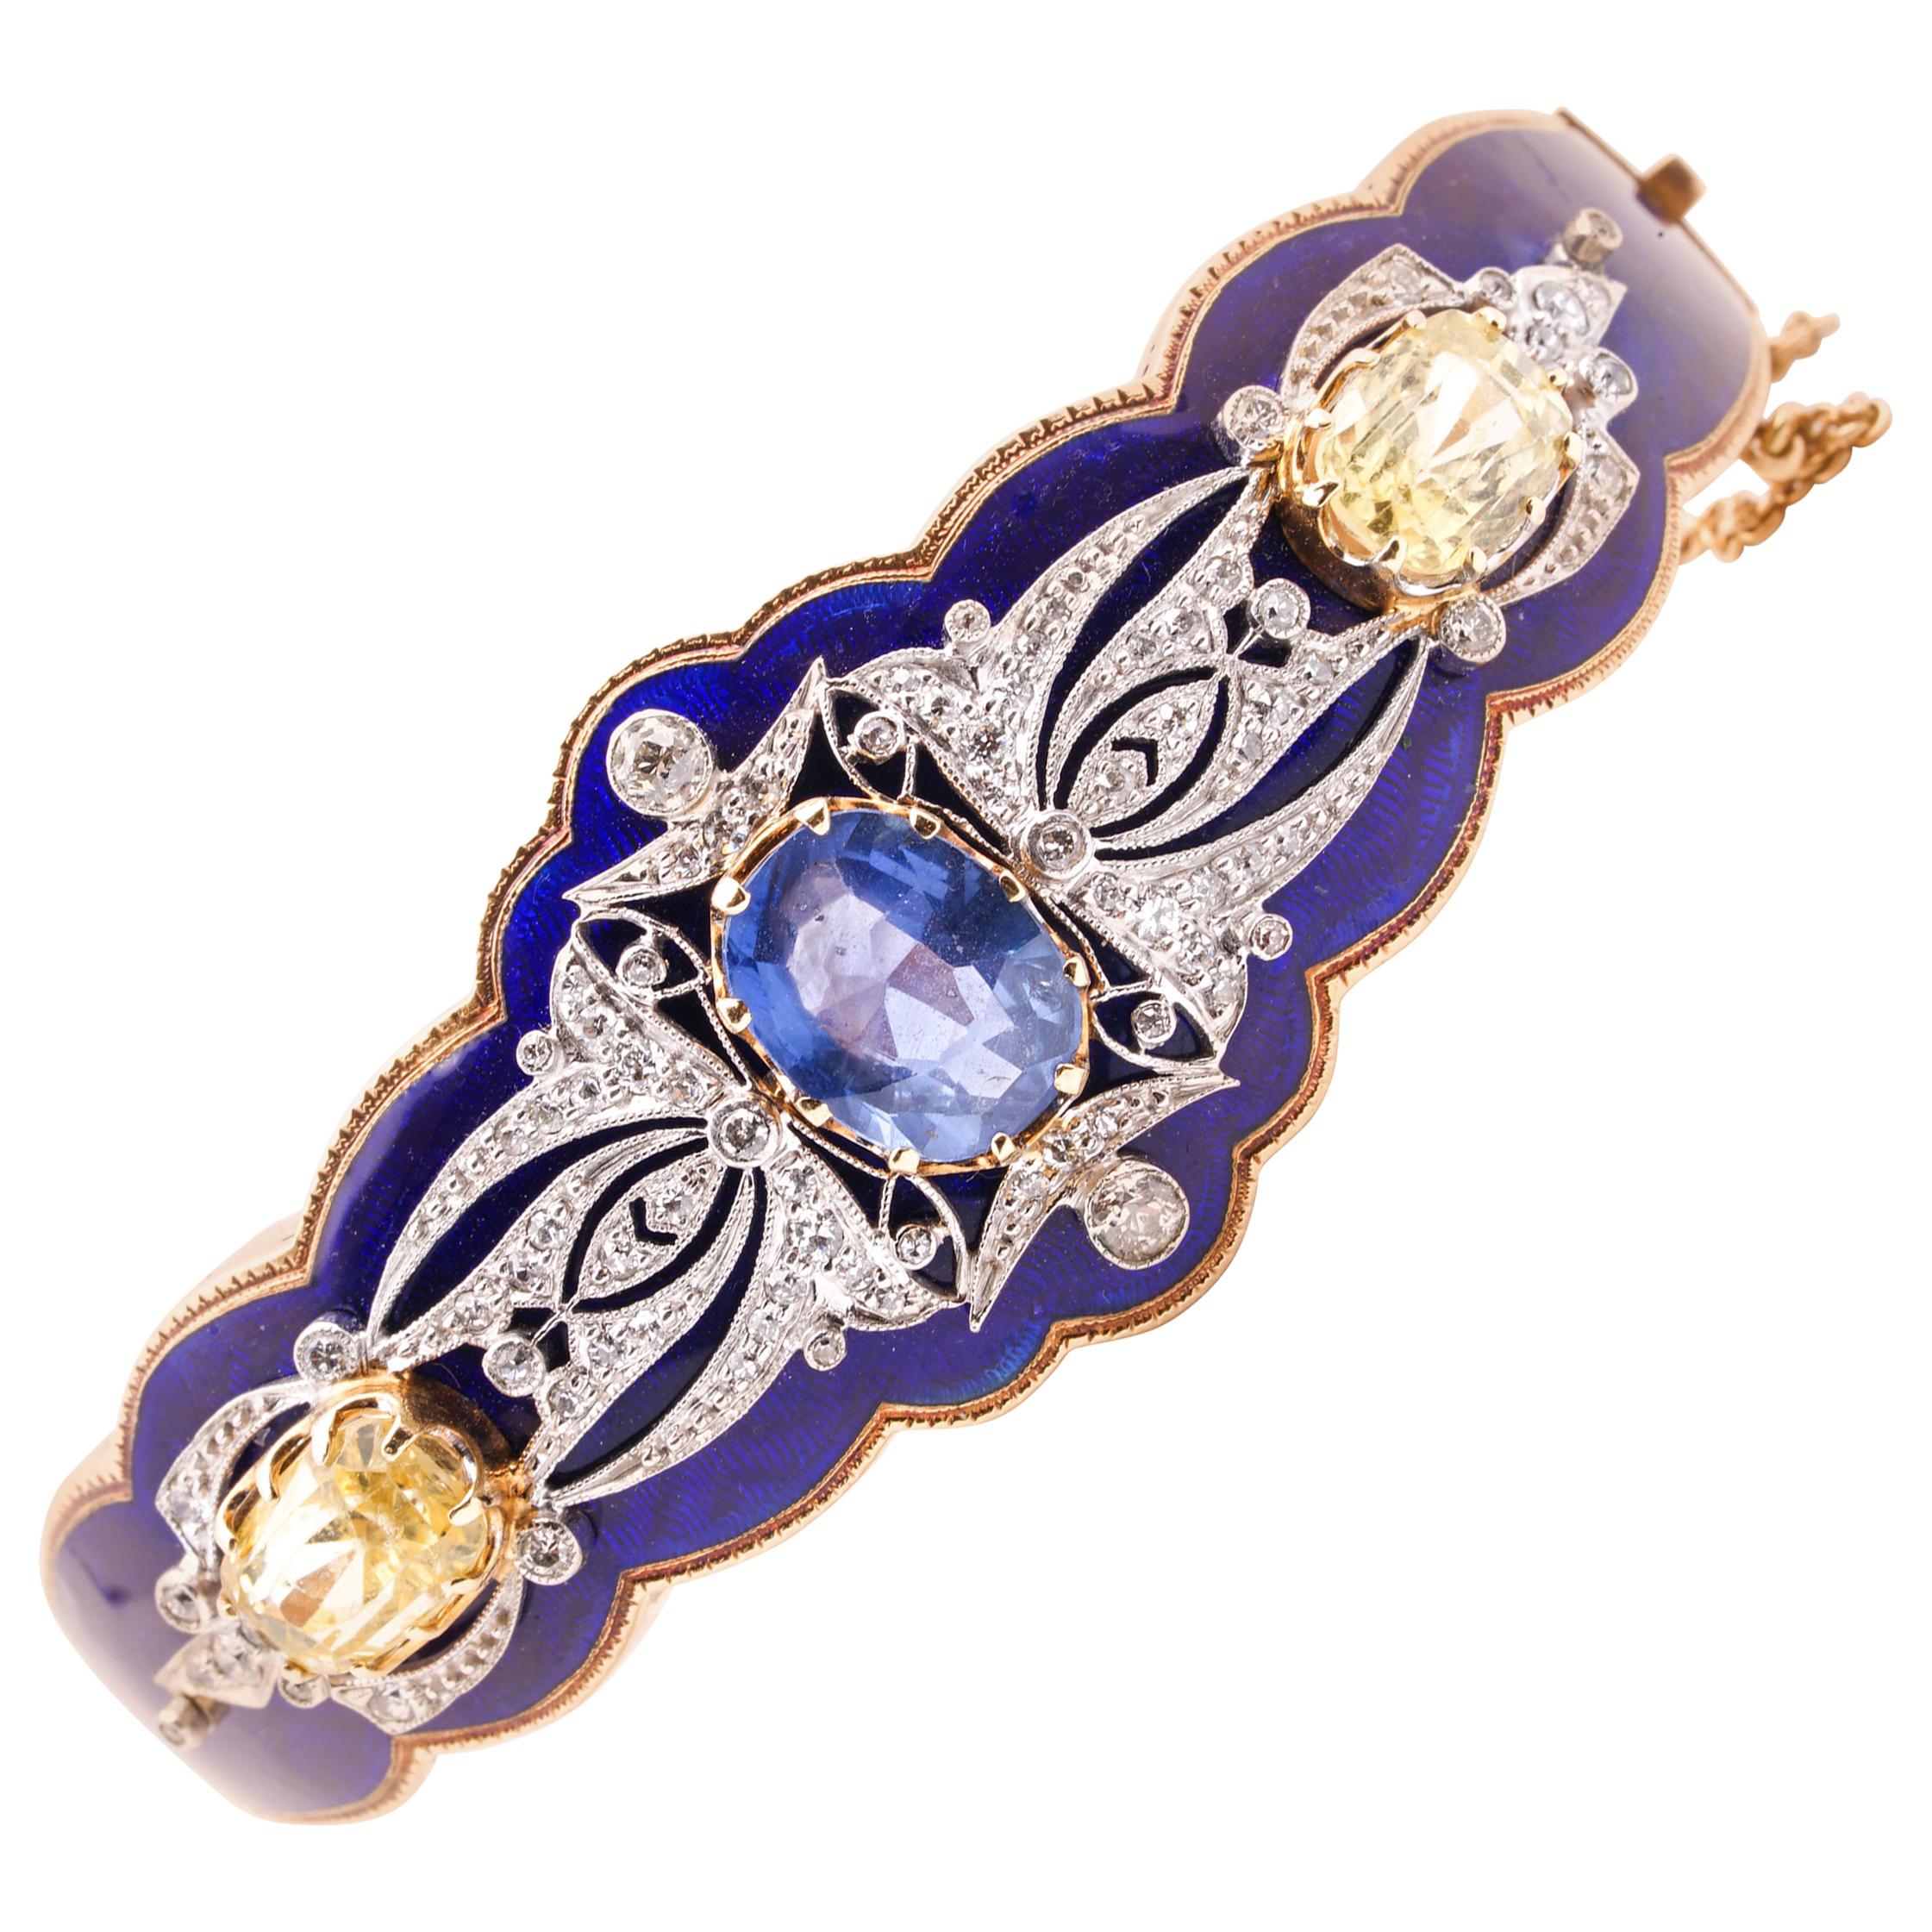 Antique Victorian bangle bracelet finely crafted in 14 Karat Gold featuring an exquisite Royal blue enamel finish and a mix of blue and yellow sapphires. One center oval blue sapphire weighs 3.48 cts and is certified by AGL ( American Gemological